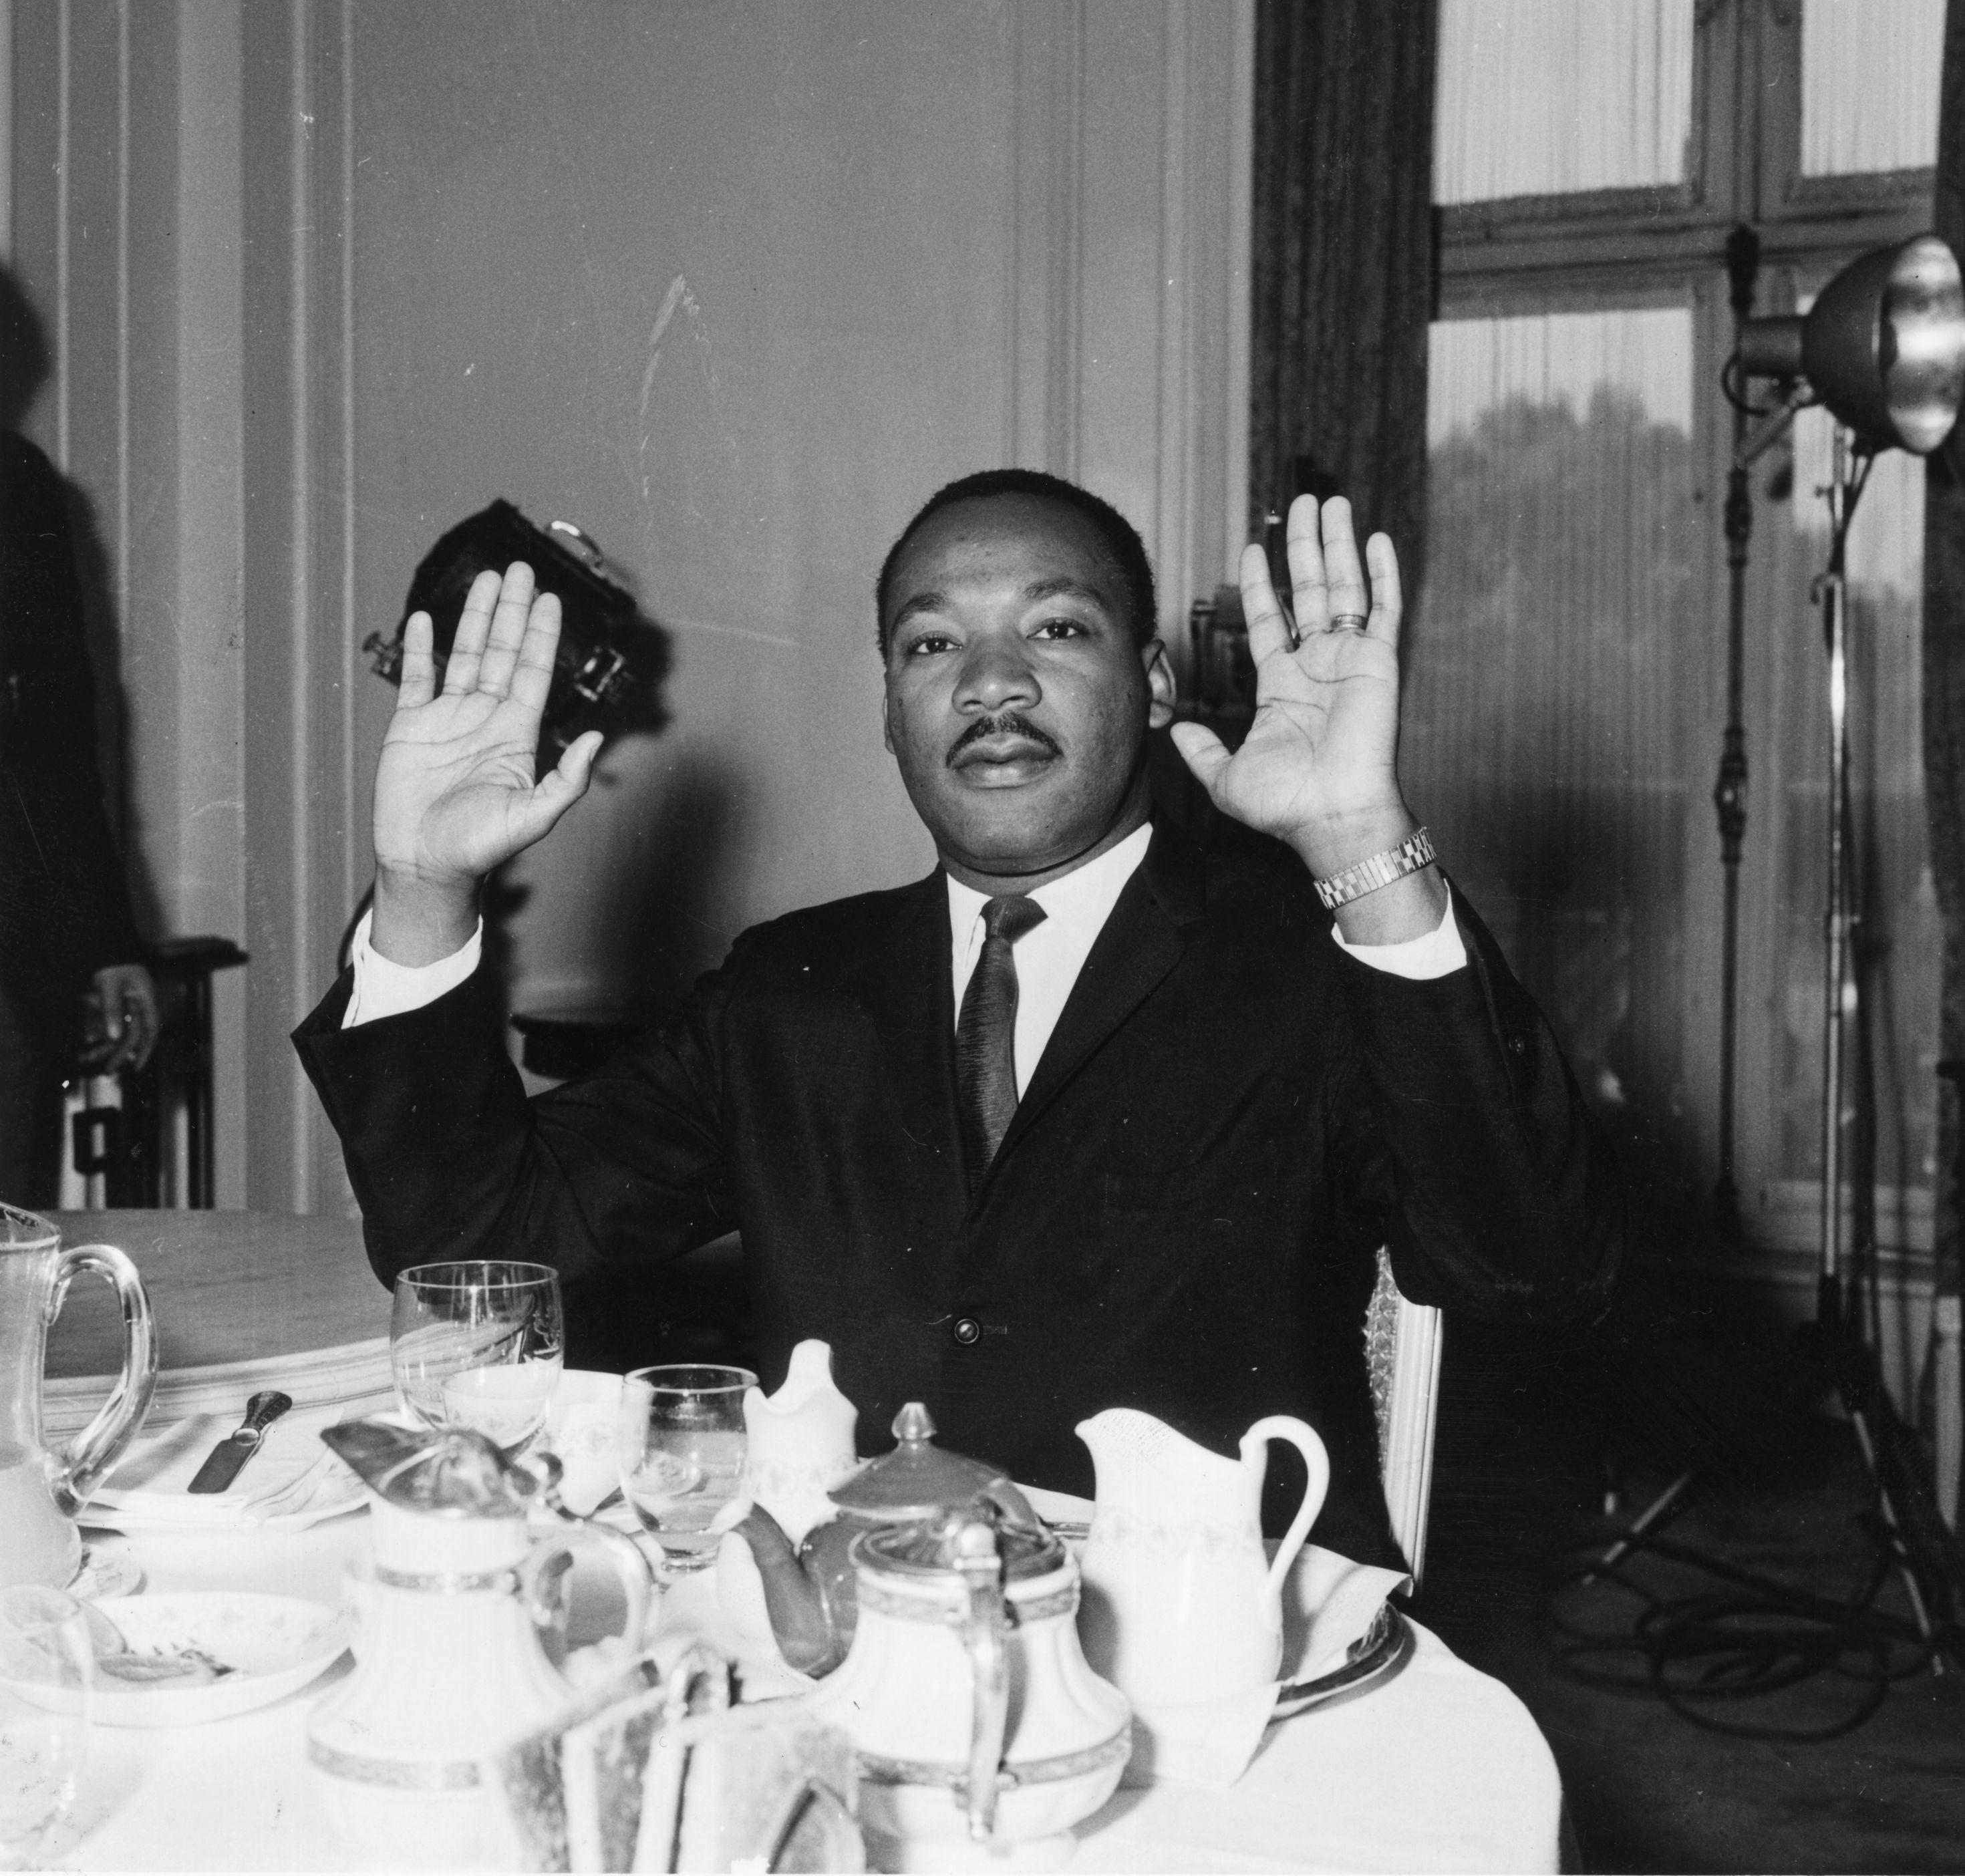 Luther King's Hands